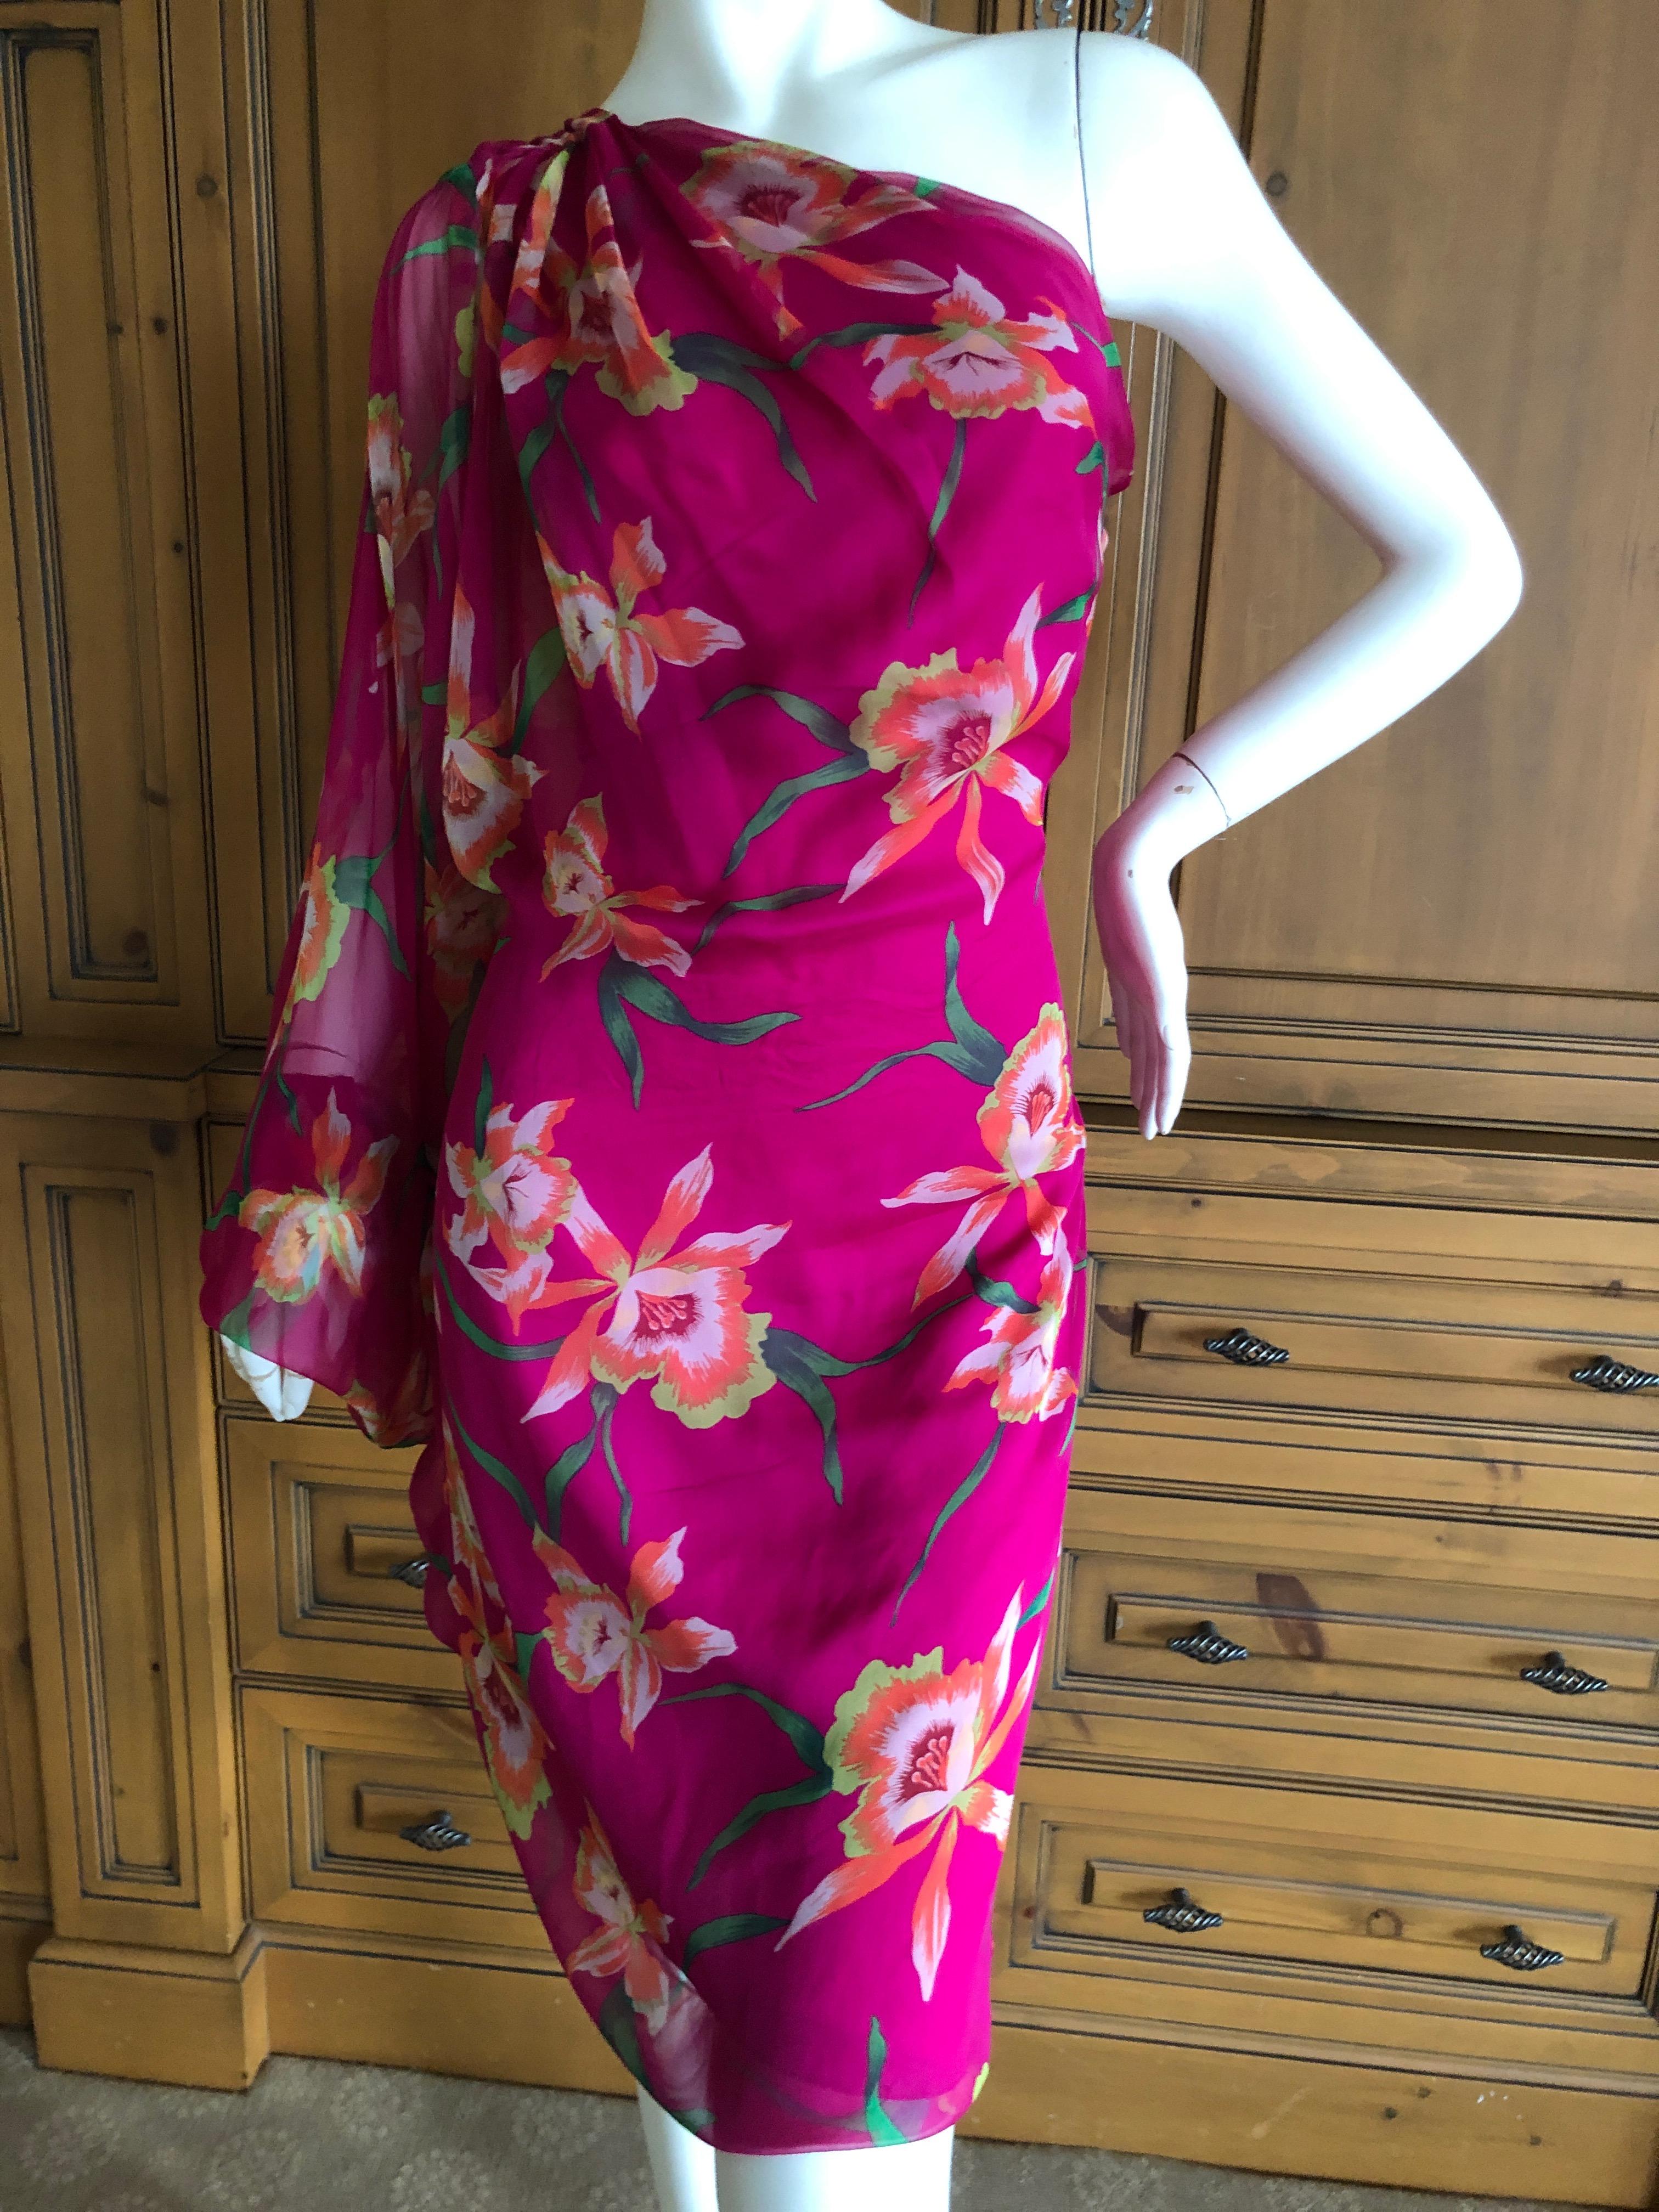 Christian Dior by John Galliano's One Sleeve Pink Silk Floral Cocktail Dress.
Size 40
Bust 36